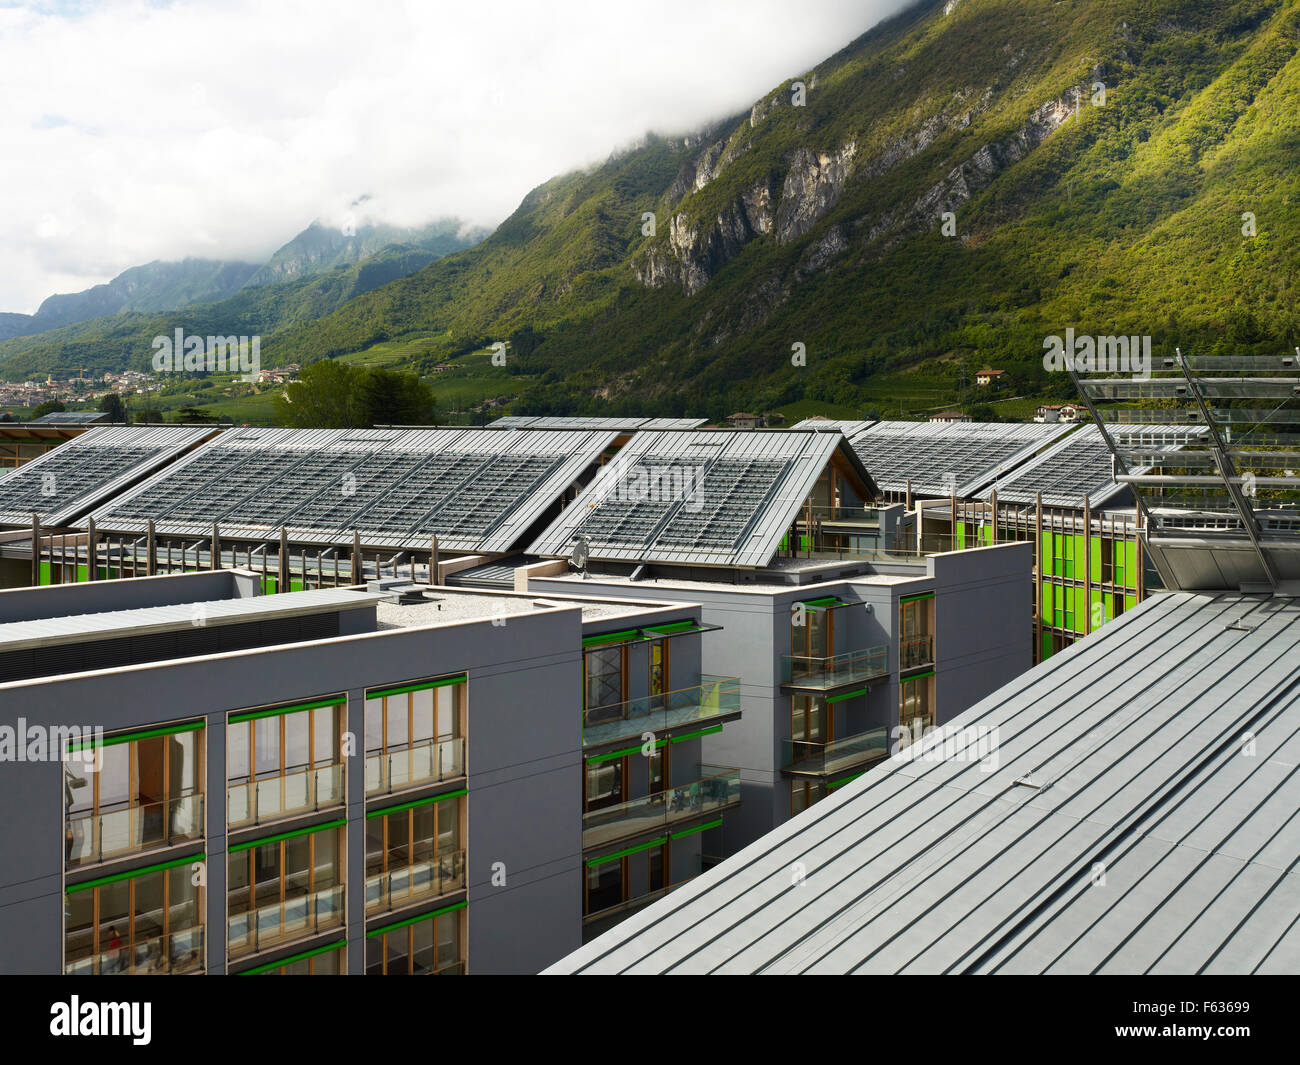 Roofscape with photovoltaic panelling and mountain range beyond. MUSE Science Museum, Trentino, Italy. Architect: Renzo Piano Bu Stock Photo